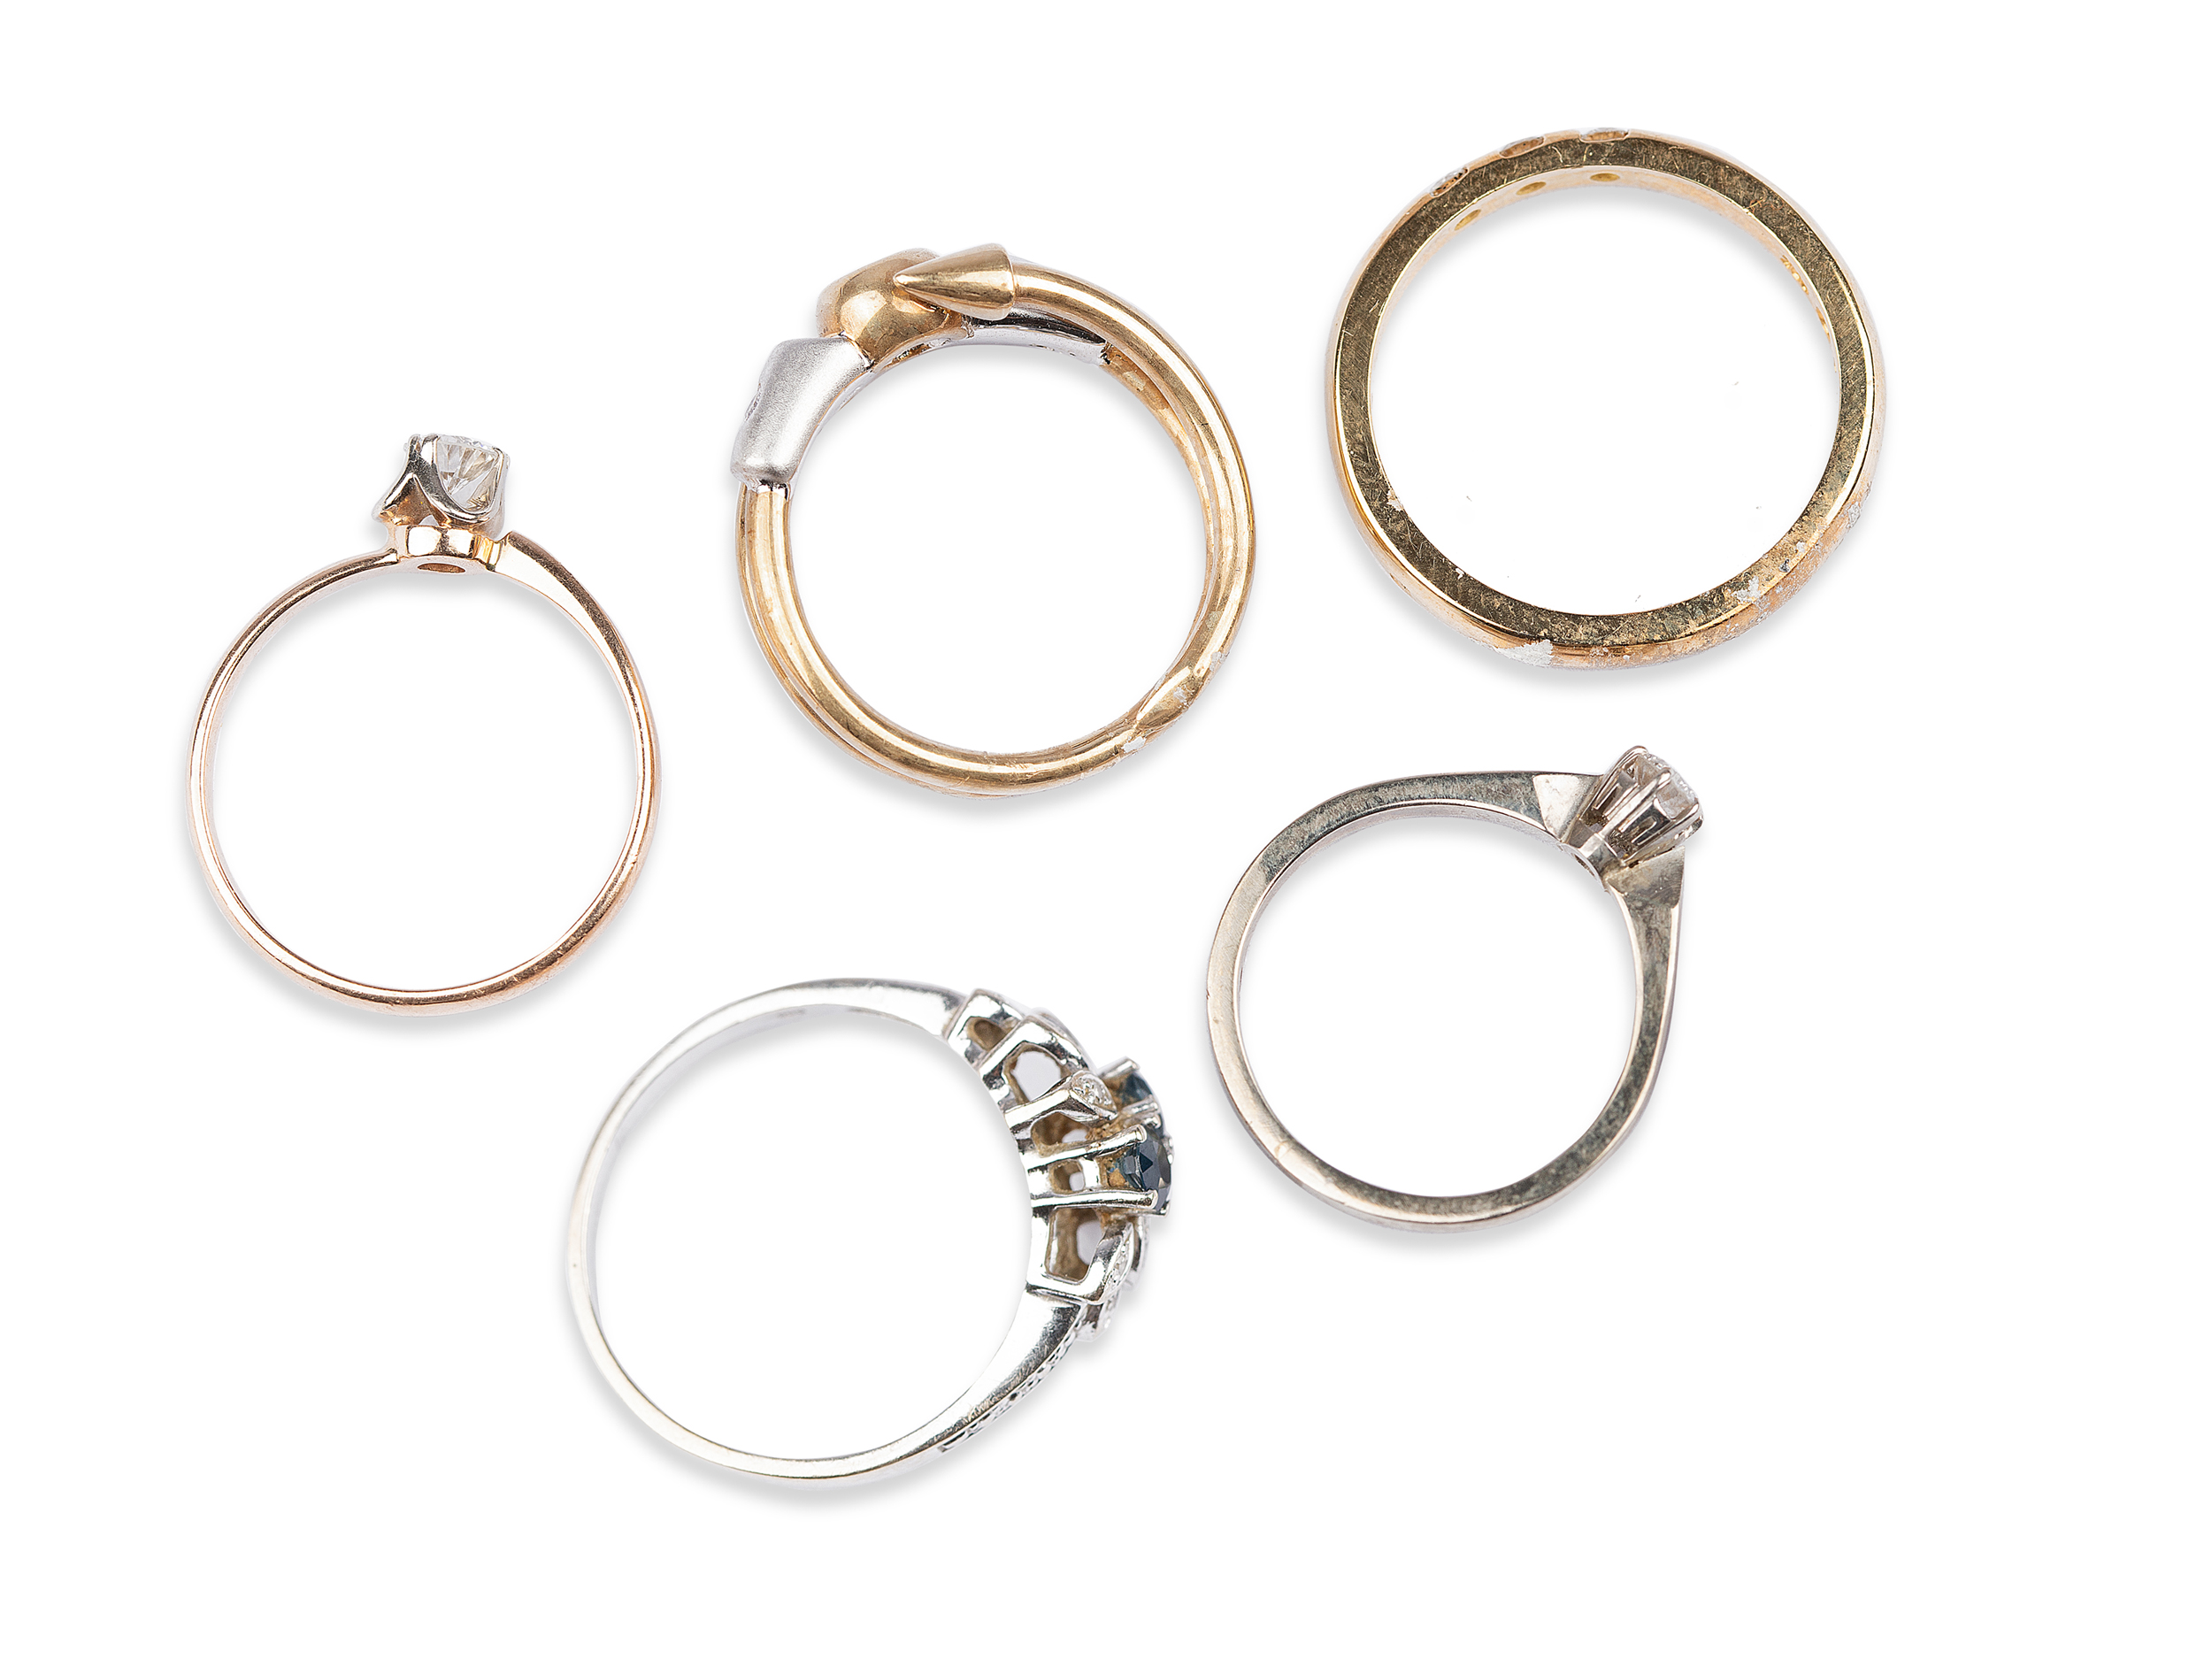 Mixed lot: 5 rings, 14kt gold (4 rings) and 18kt gold (1 ring), 14kt gold rings with diamonds - Image 2 of 2